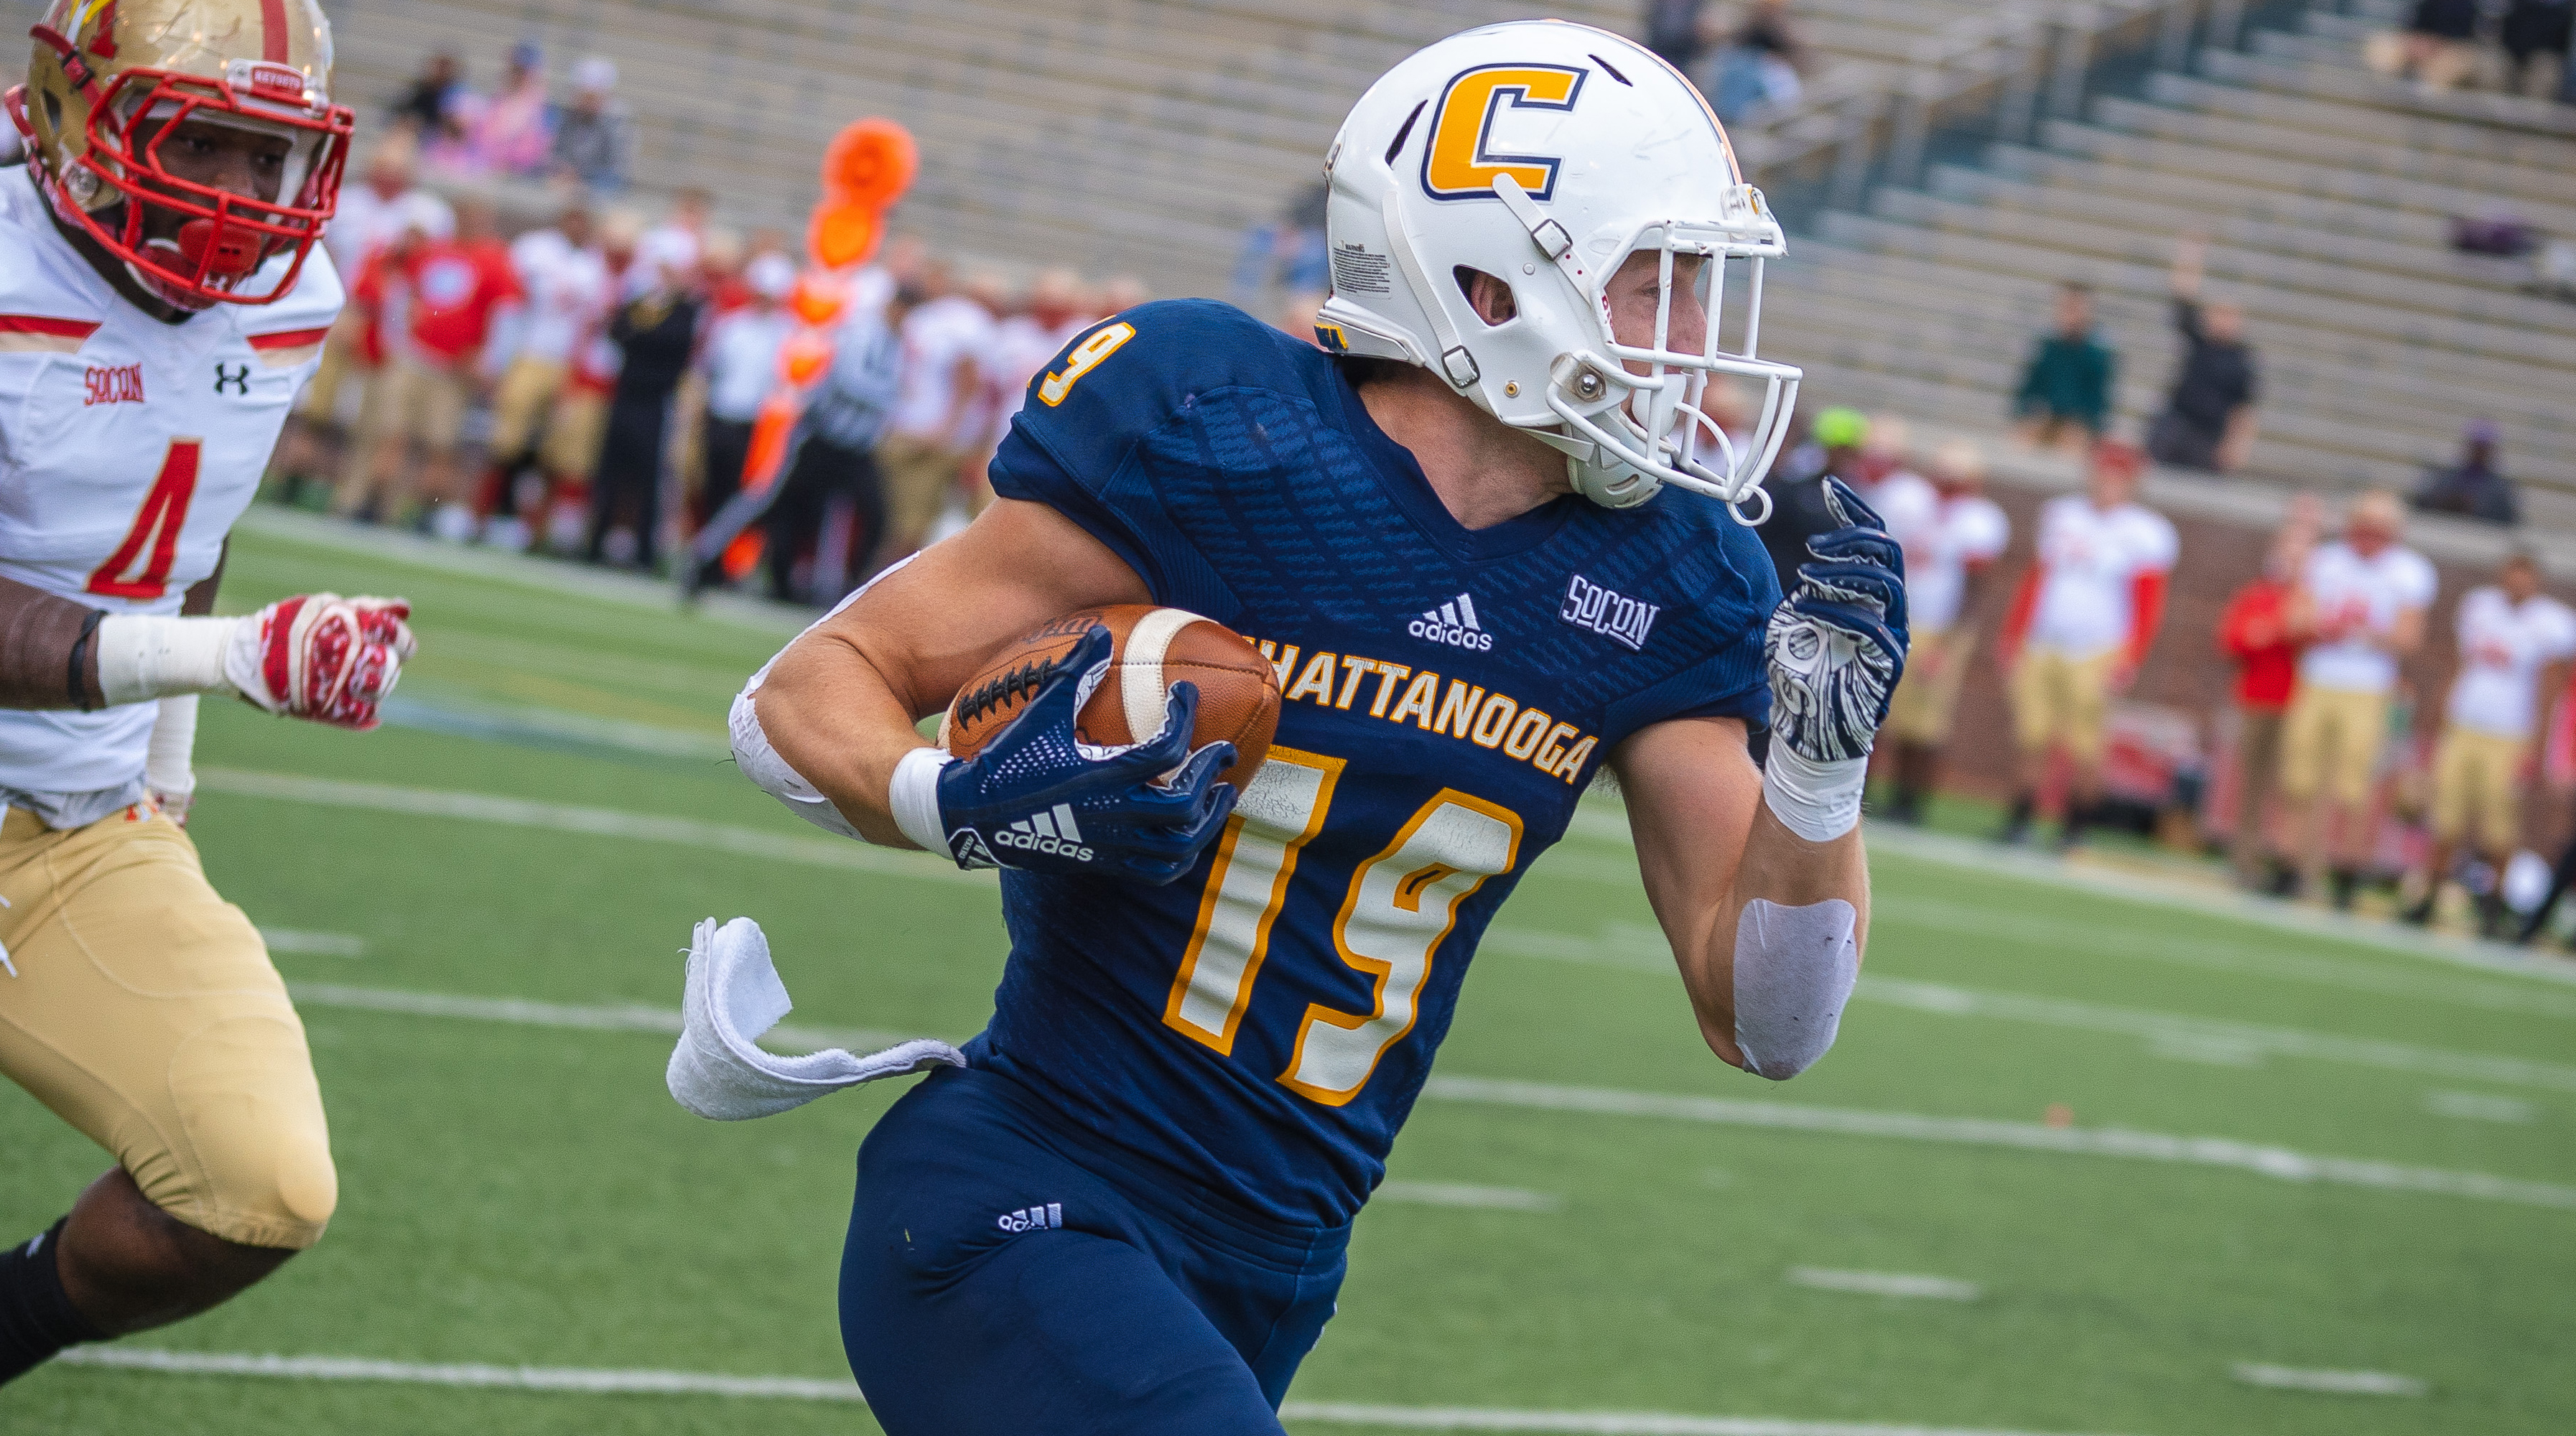 WR Bryce Nunnelly (Chattanooga) Interview